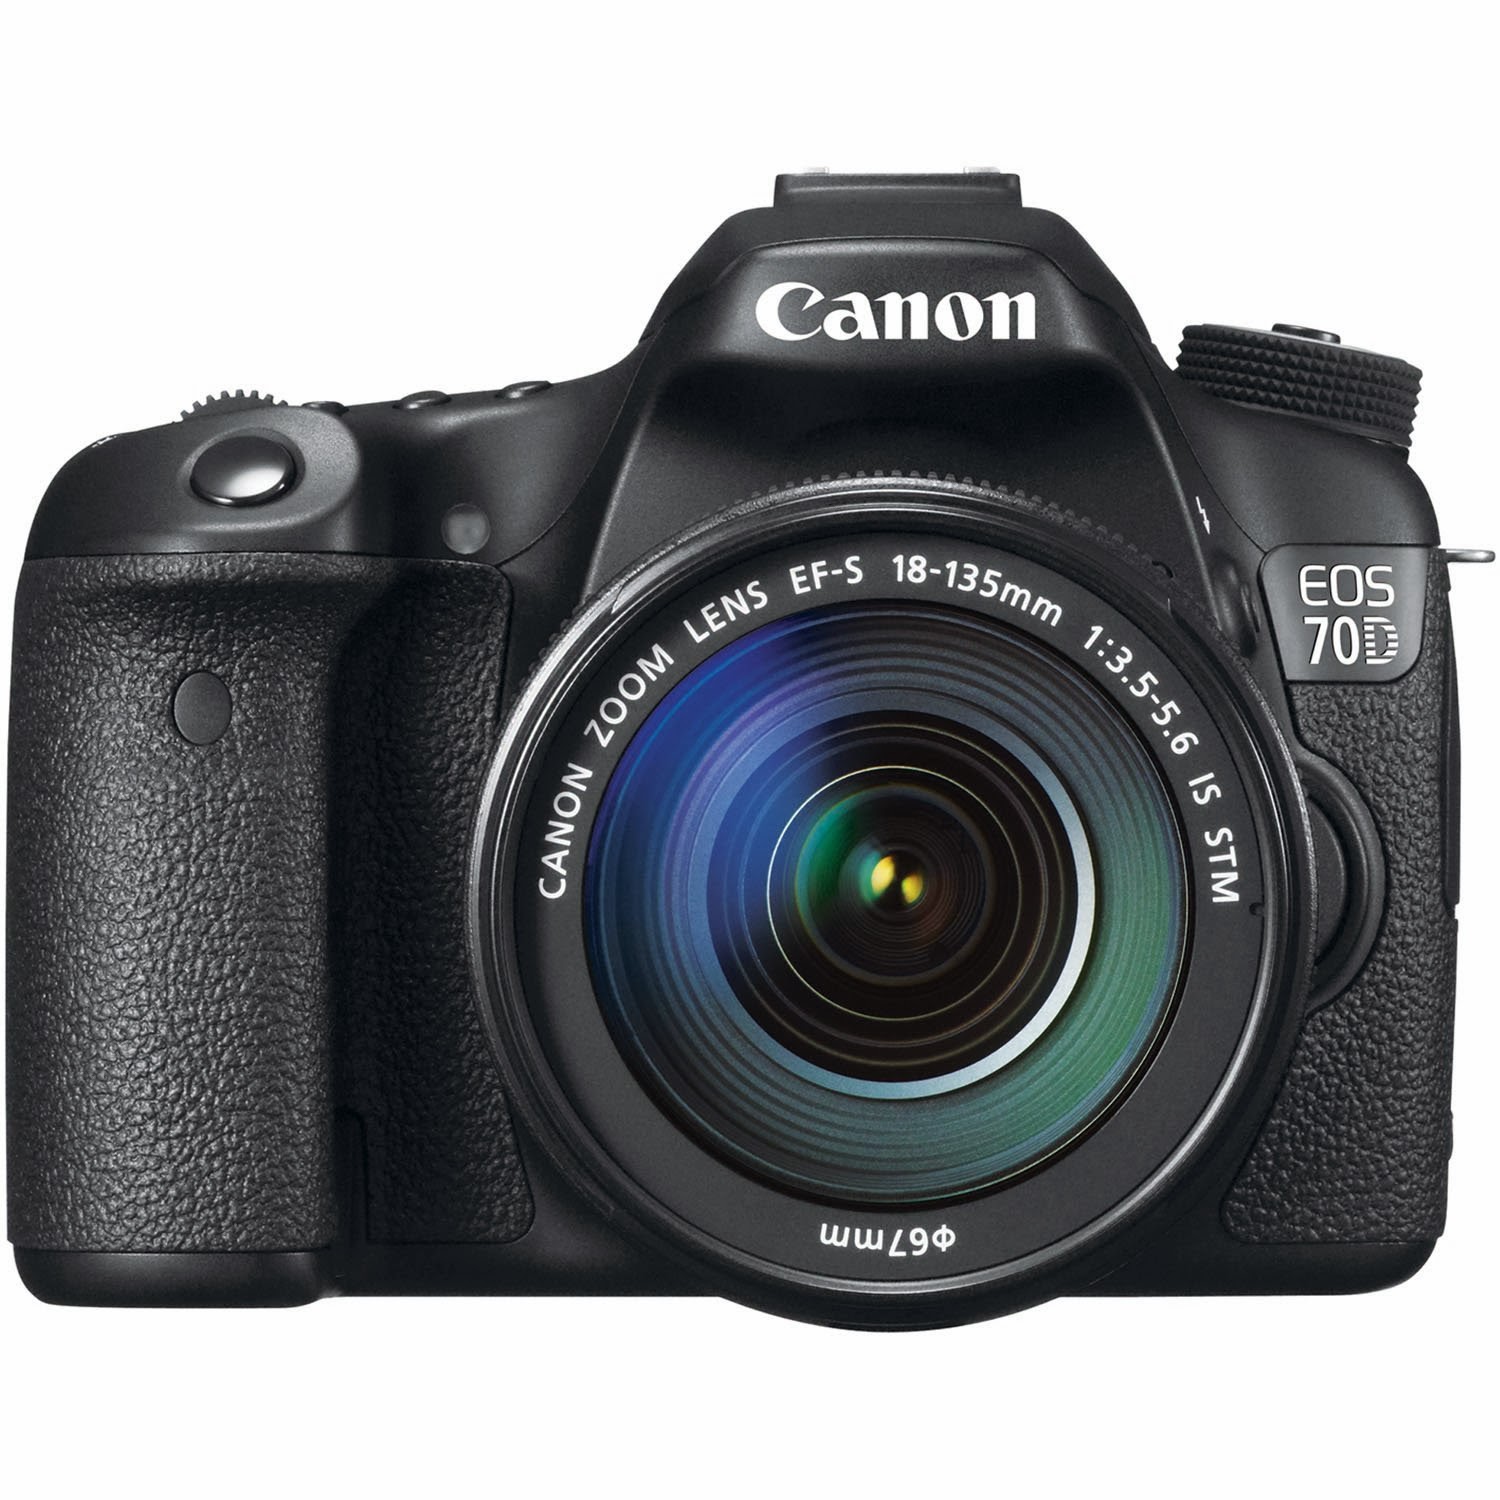 Jual Canon EOS 70D 20.2 MP Digital SLR Camera with Dual ...
